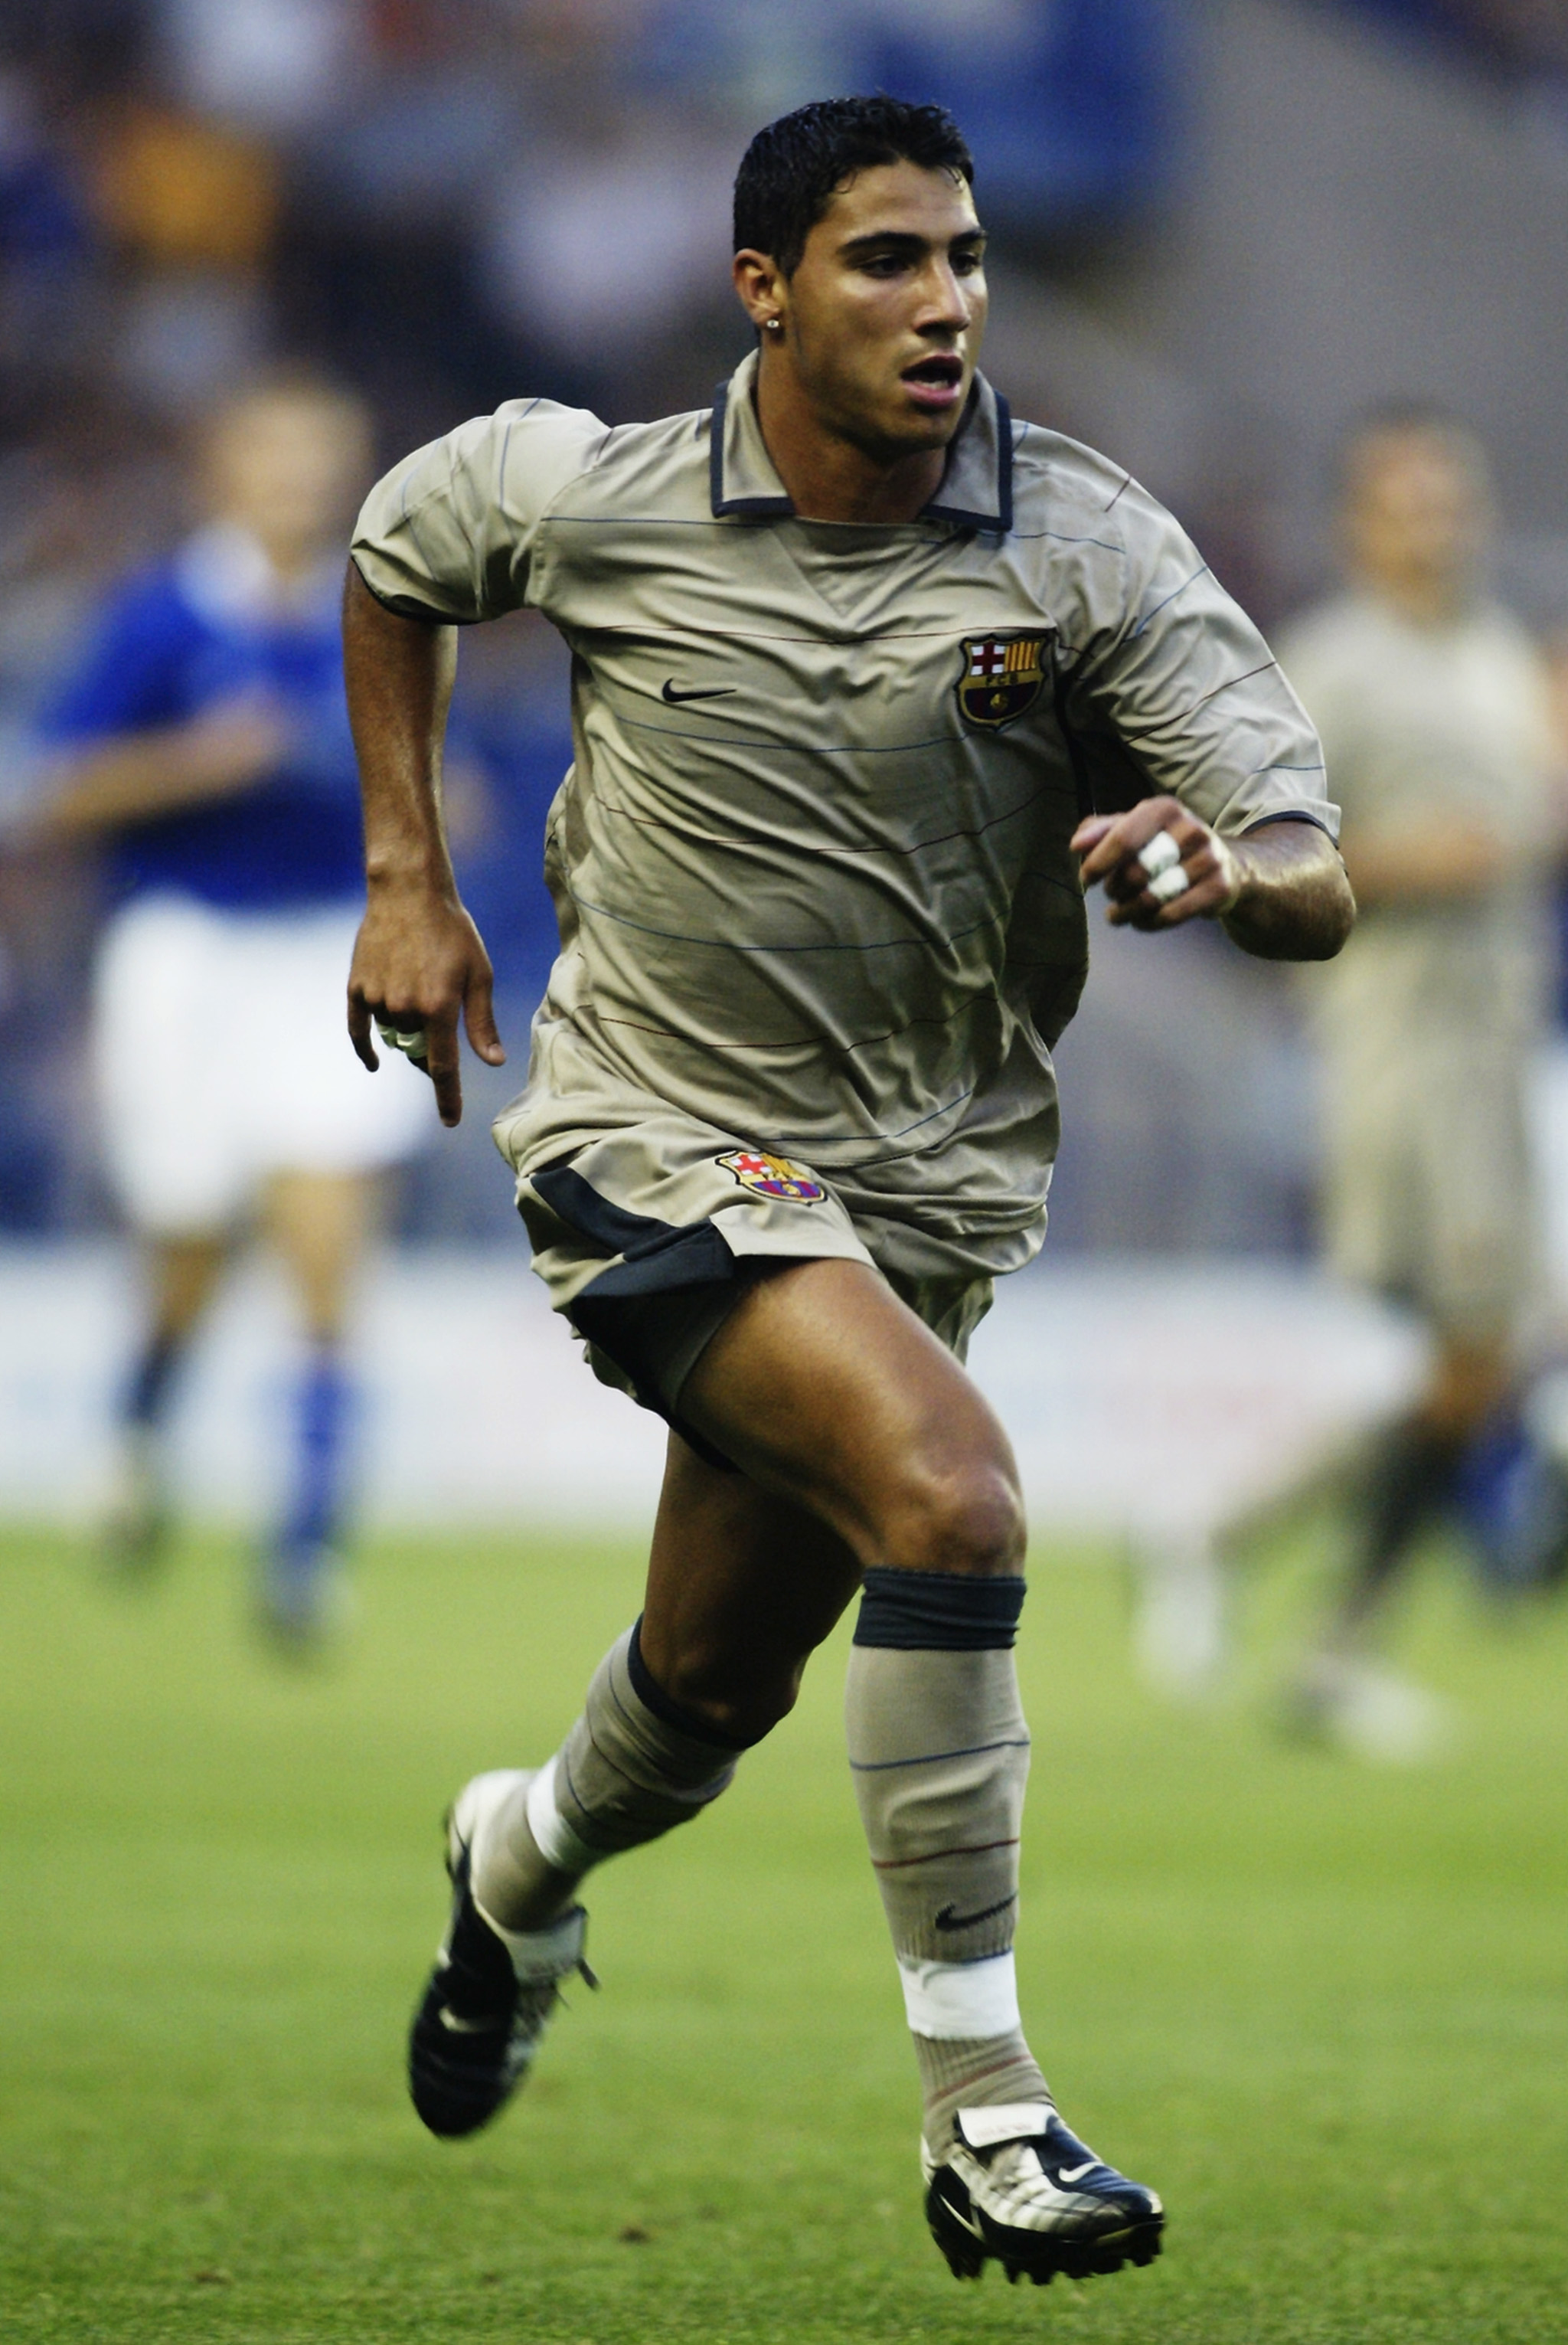 LEICESTER - AUGUST 8:  Ricardo Quaresma of FC Barcelona in action during the Pre-Season Friendly match between Leicester City and FC Barcelona held on August 8, 2003 at the Walkers Stadium, in Leicester, England. FC Barcelona won the match 1-0. (Photo by